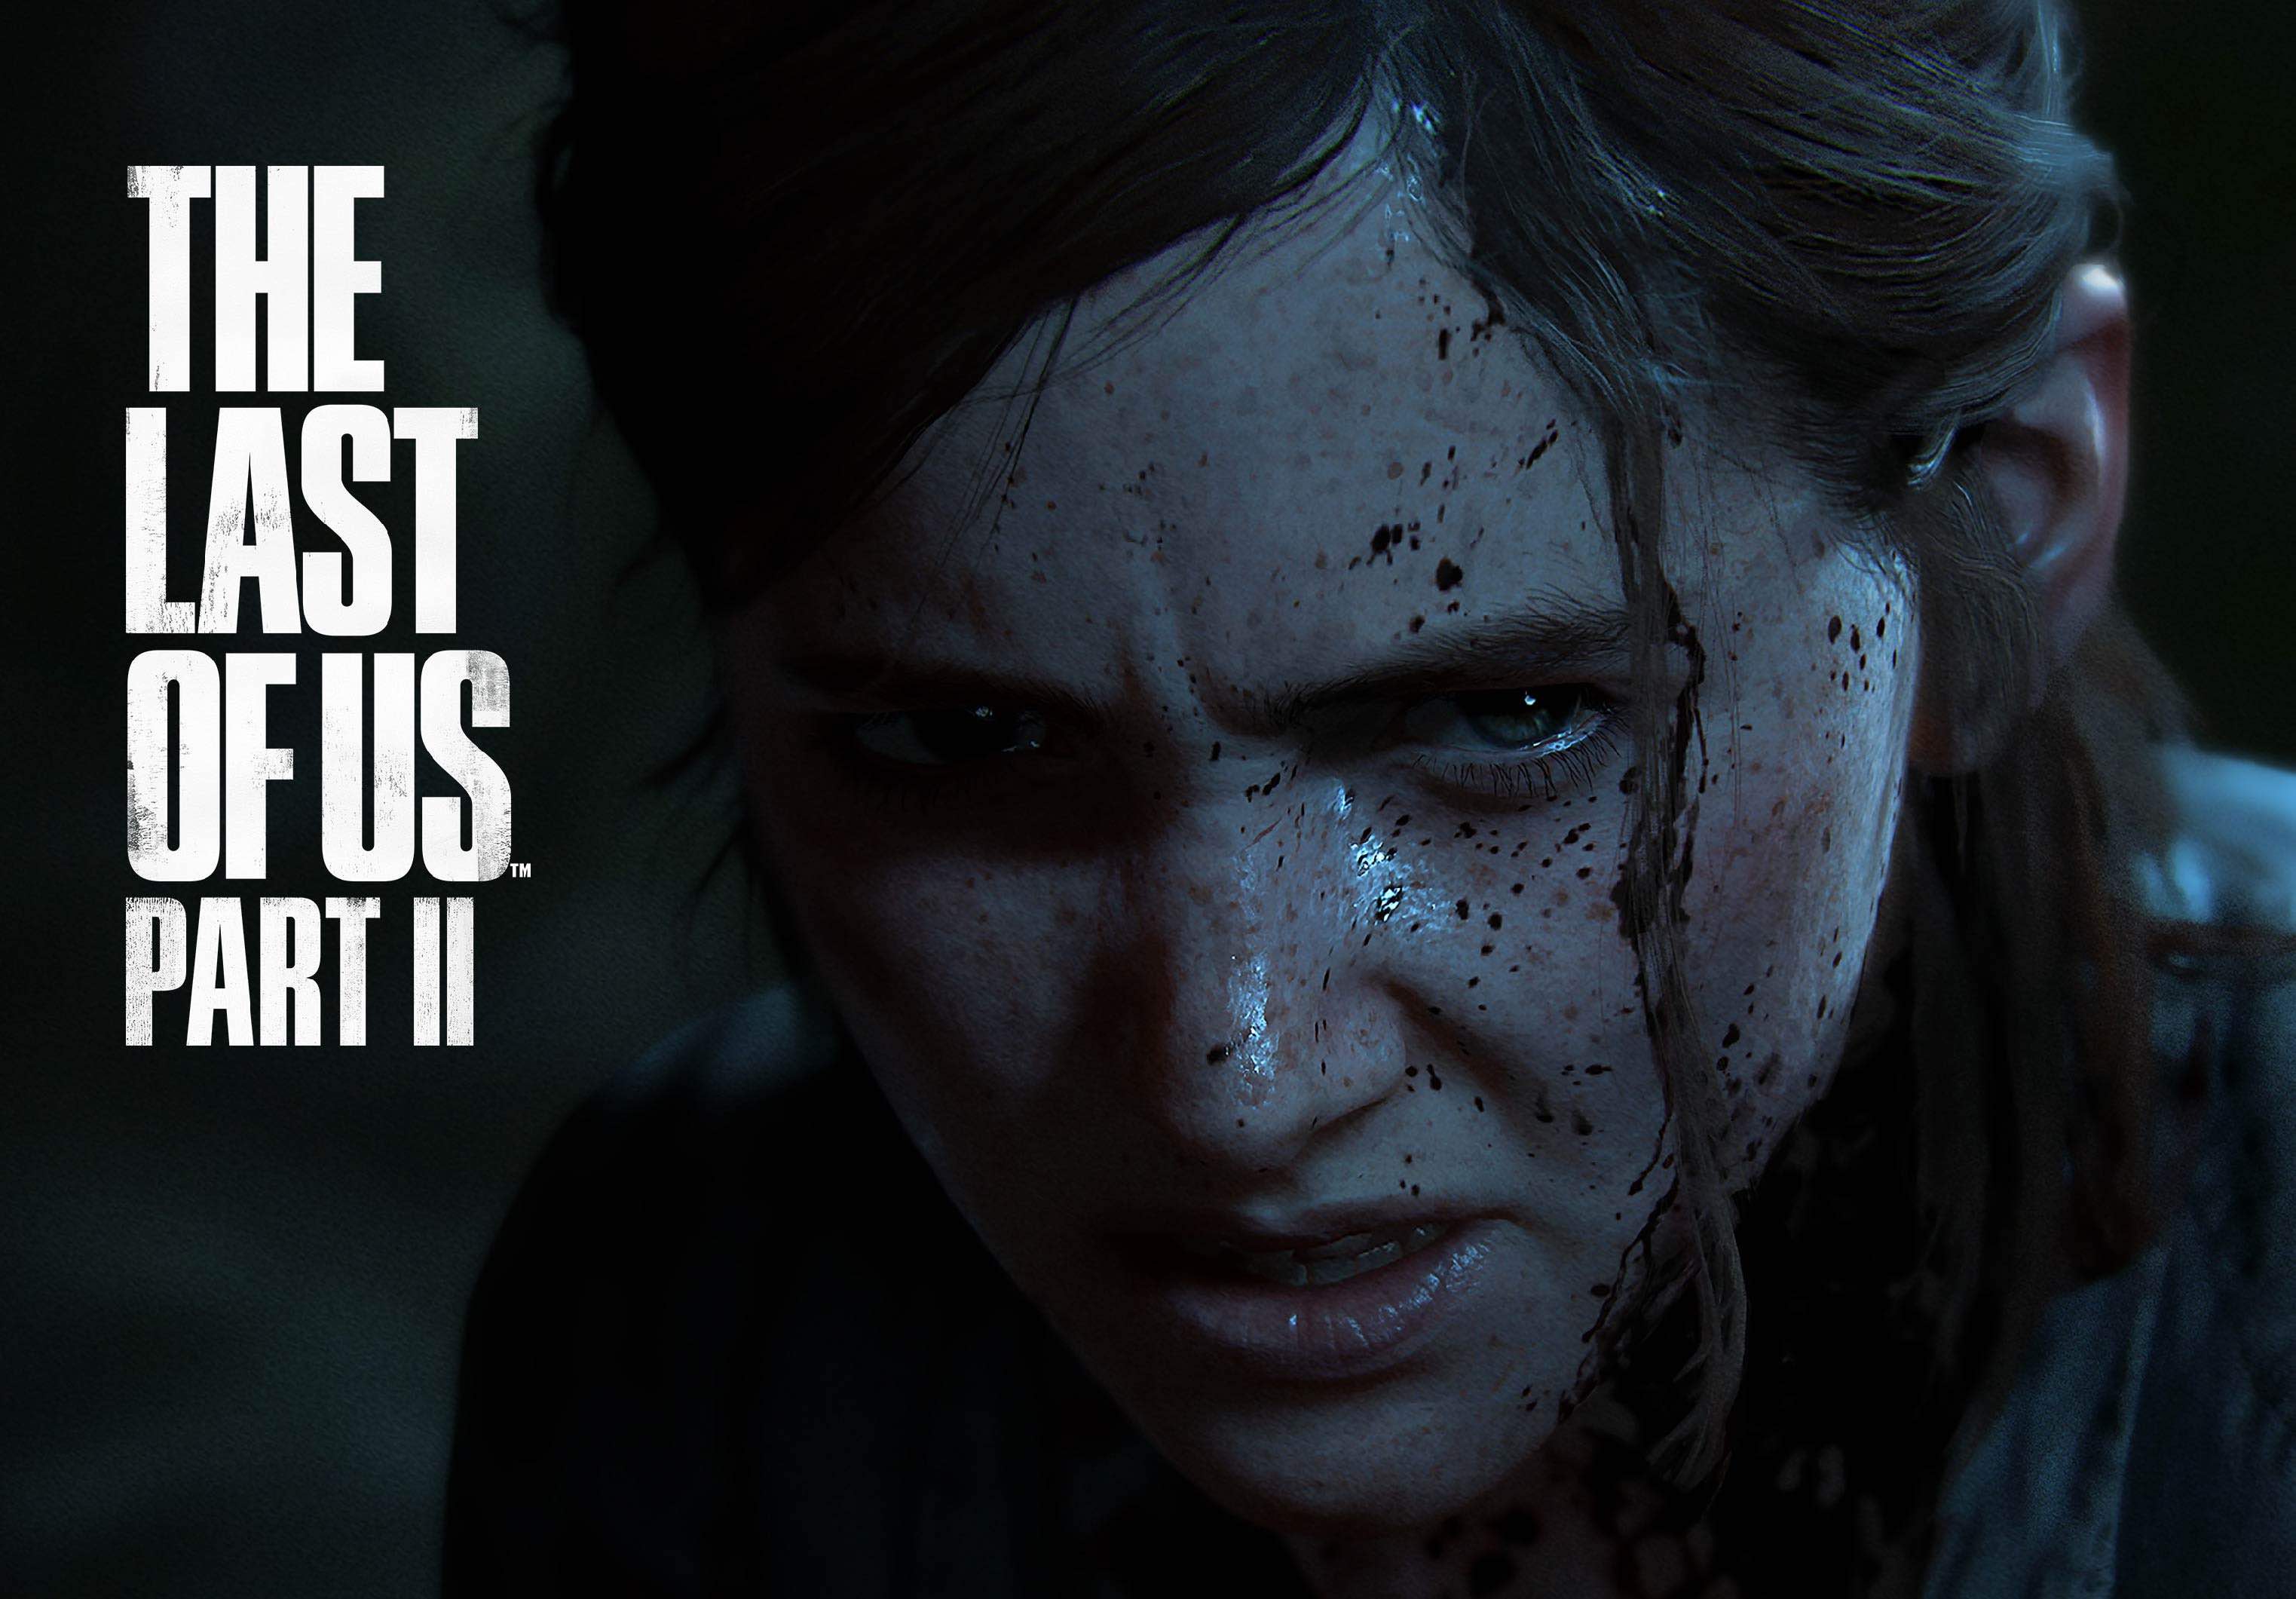 The Last of Us Part II Features the Best of Third-Person Gameplay